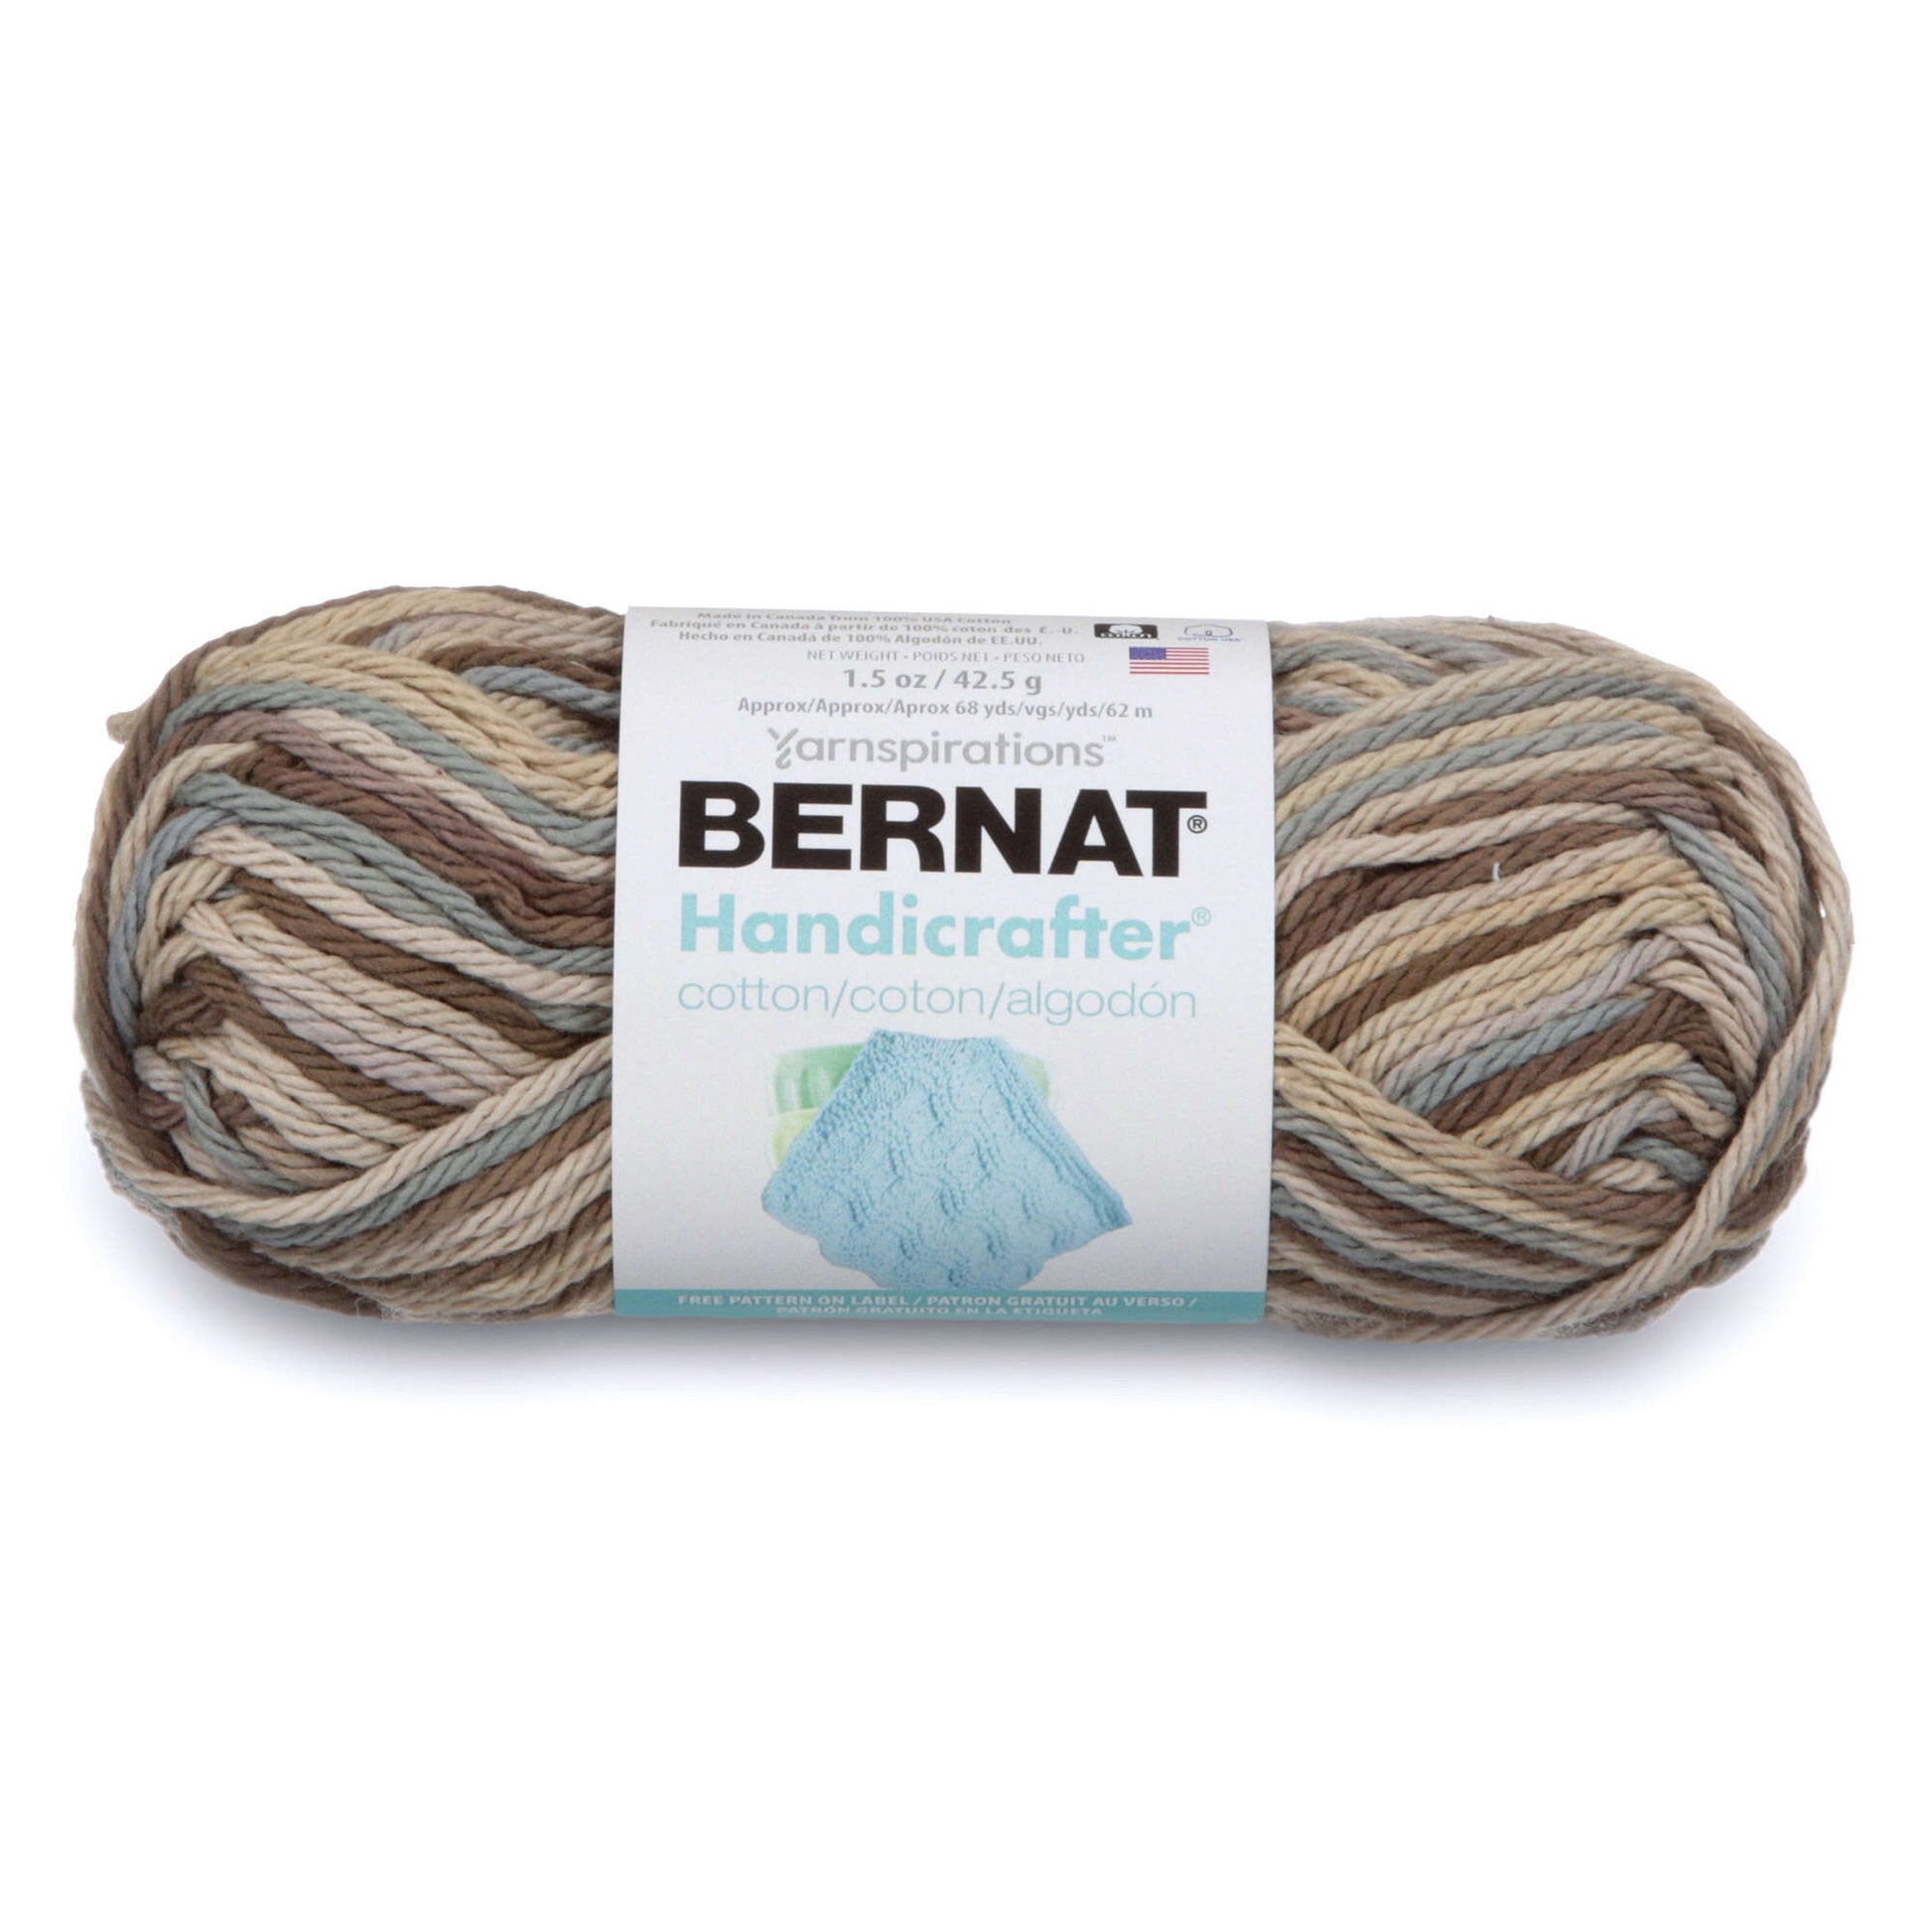 Bernat Handicrafter Cotton Ombres Yarn Earth Ombre